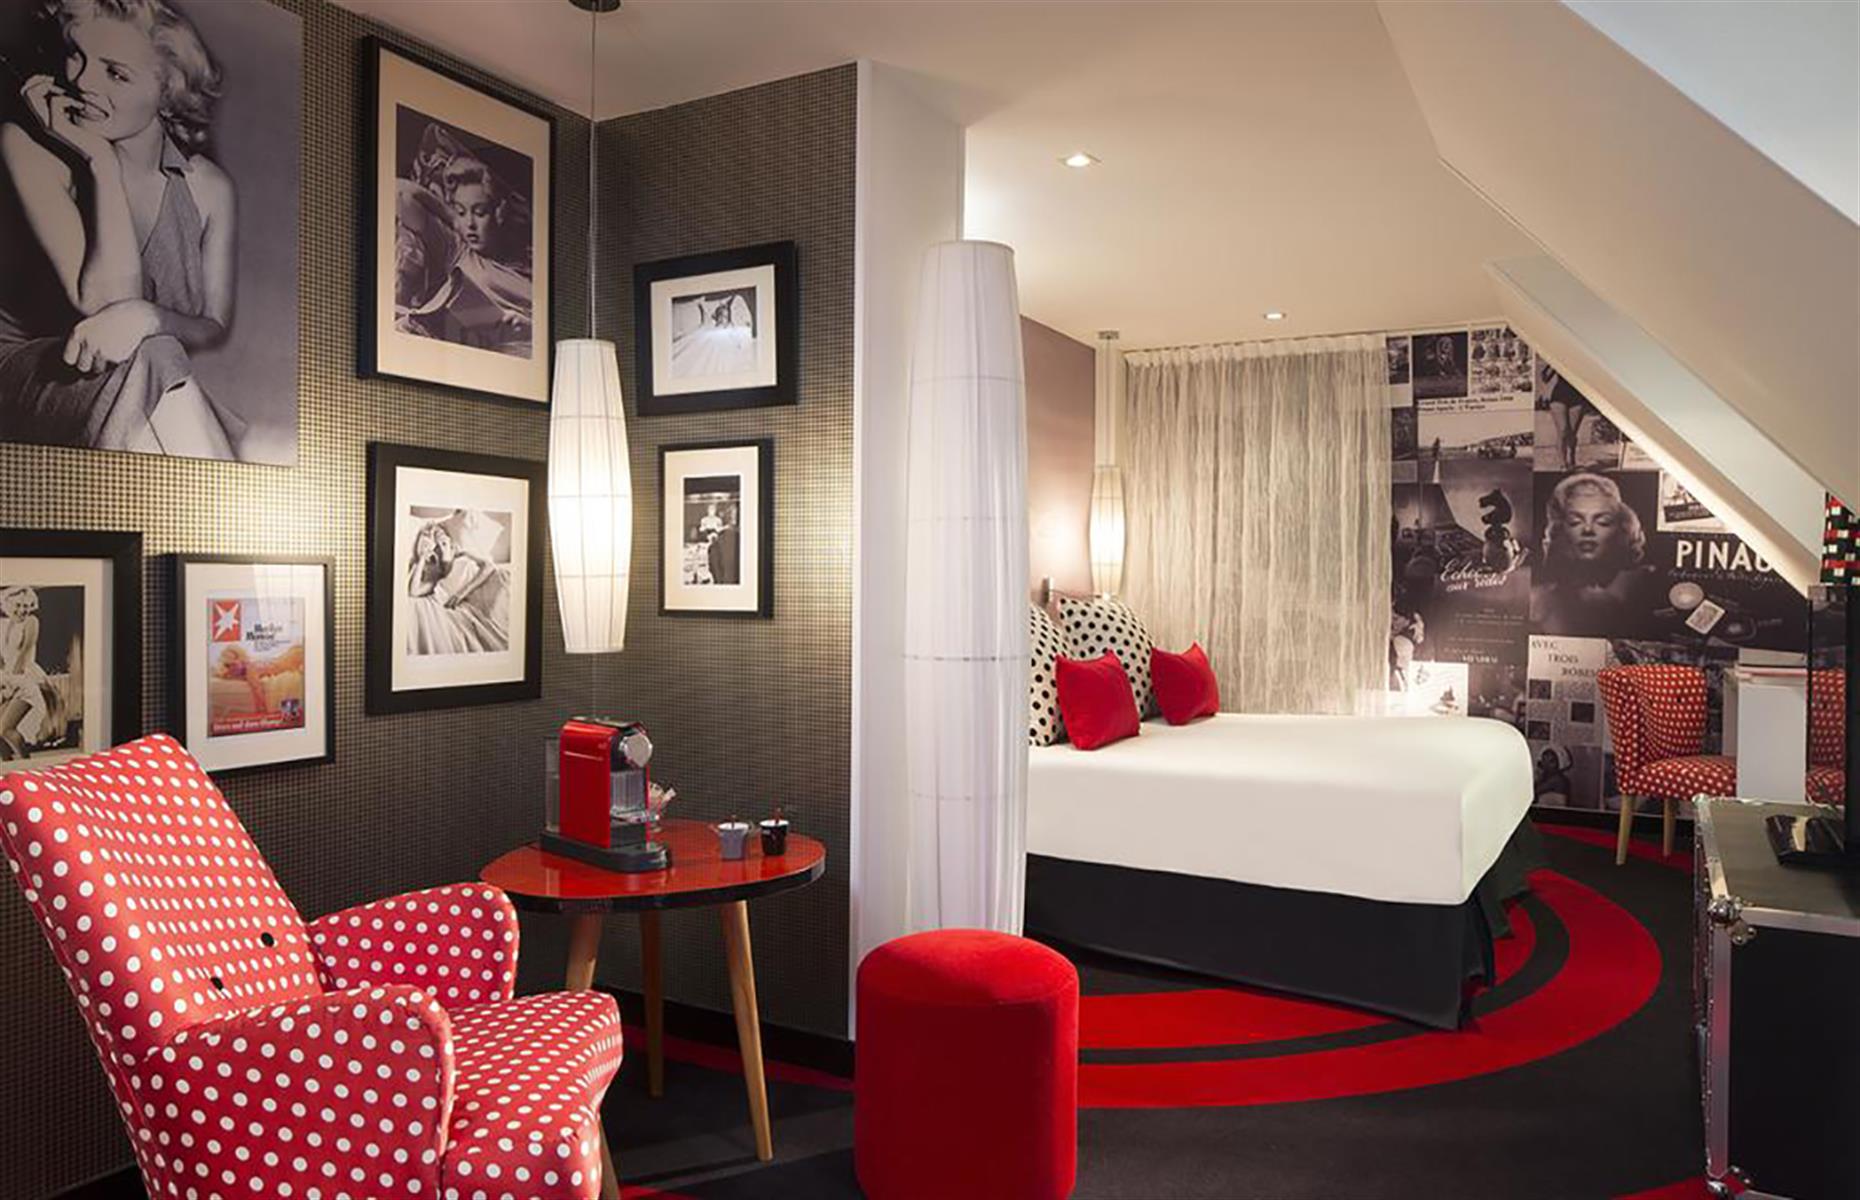 <p>A chic 1950s-themed hotel that pays homage to movie star Marilyn Monroe, the <a href="https://www.booking.com/hotel/fr/platine-hotel.en-gb.html" rel="nofollow” target=">Platine Hotel</a> in Paris blends modern amenities with retro dècor throughout. The Prestige double room is filled with pictures of Marilyn as well as polka dot patterns and the eye-catching black-white-red color scheme so popular in that era. </p>